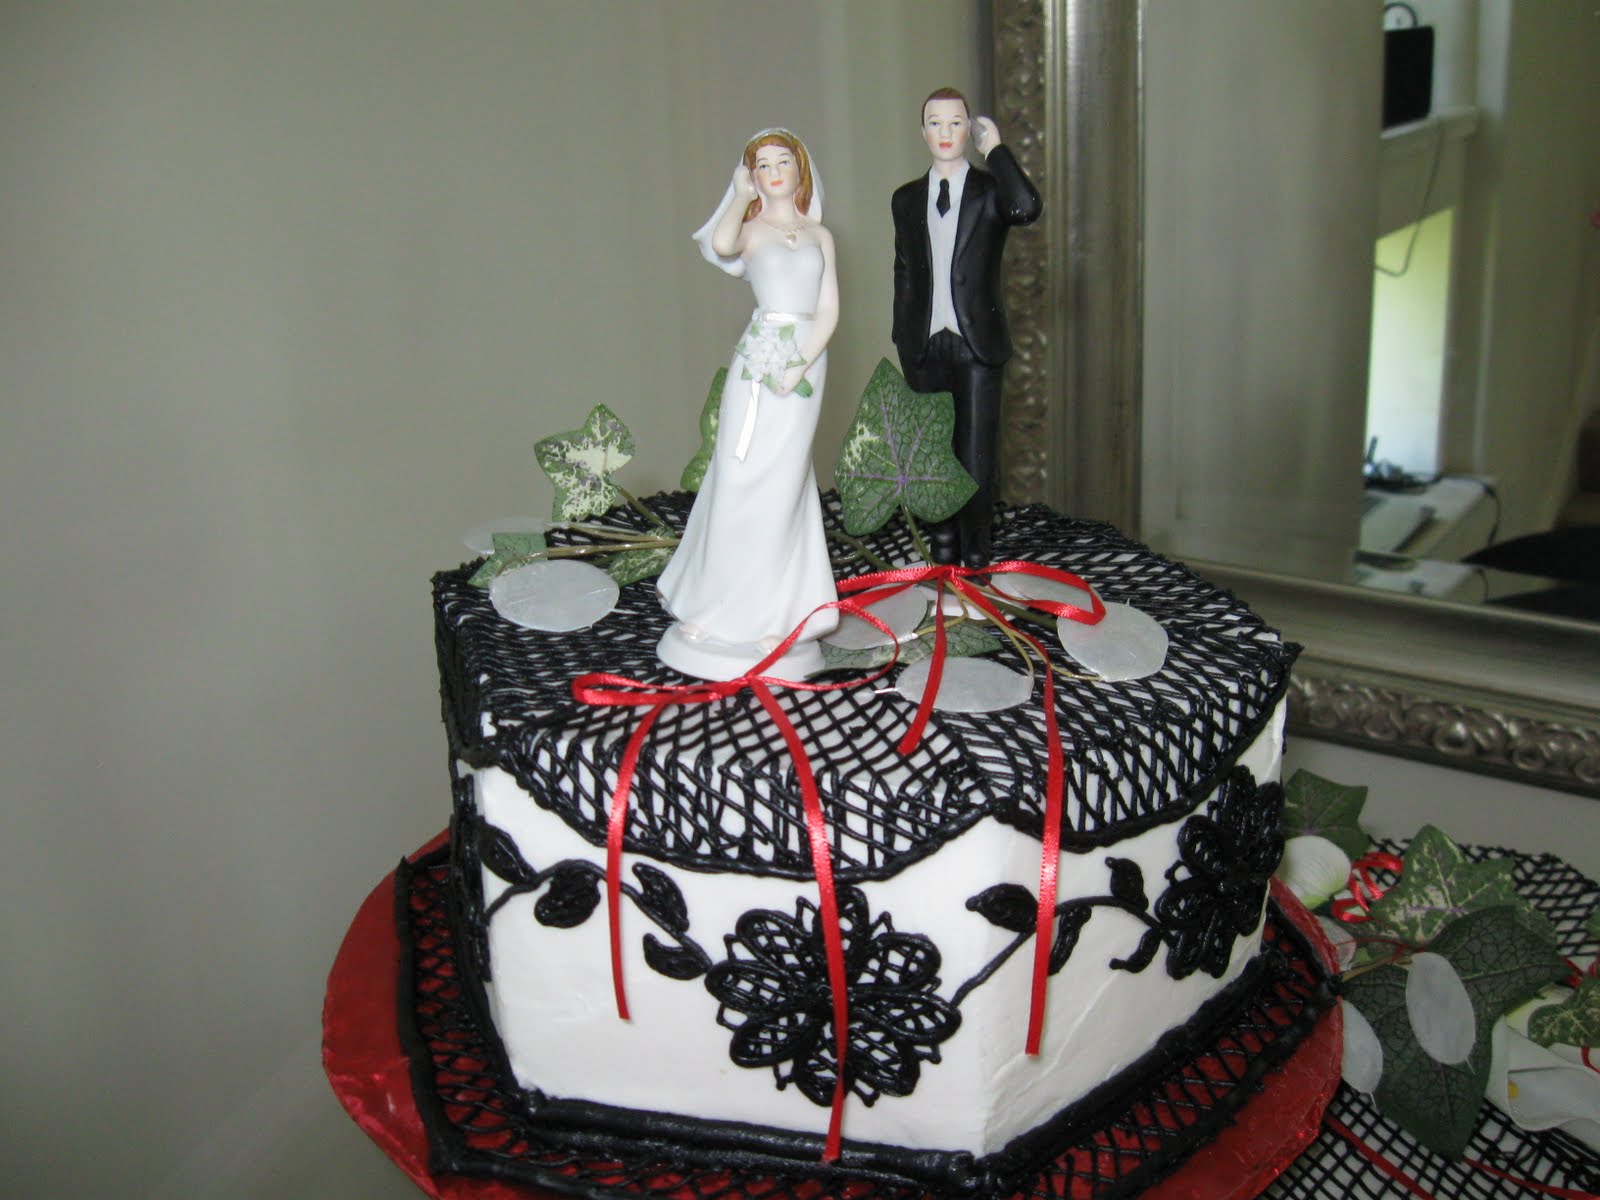 Black, white and red wedding